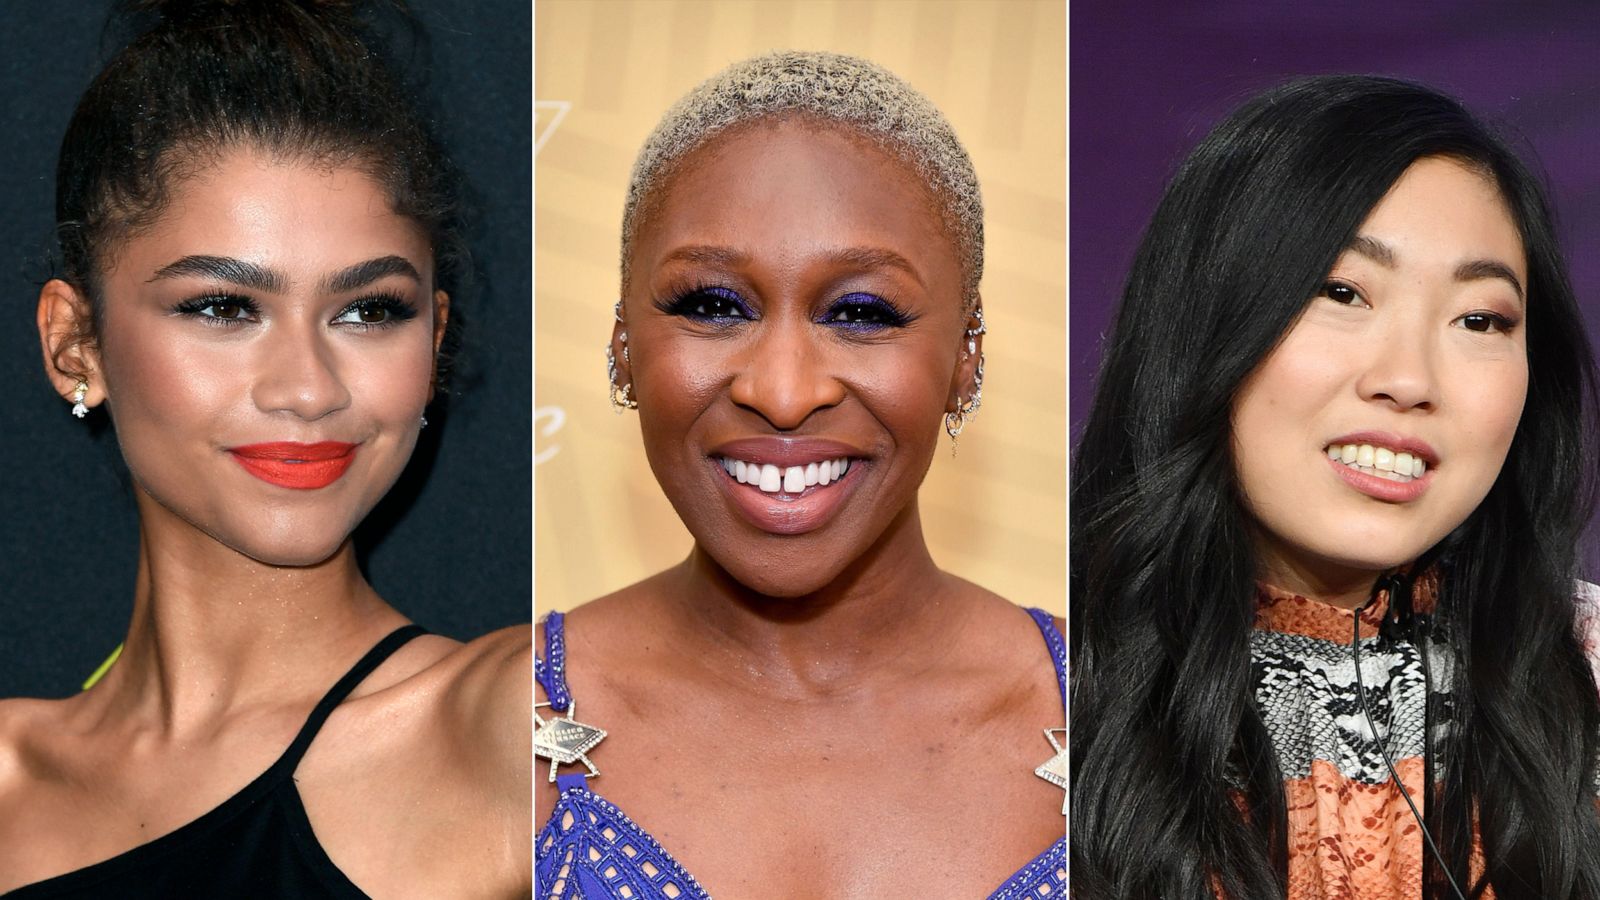 PHOTO: Zendaya, Cynthia Erivo, and Awkwafina are among the 819 people who have been invited to join the Academy of Motion Picture Arts and Sciences.